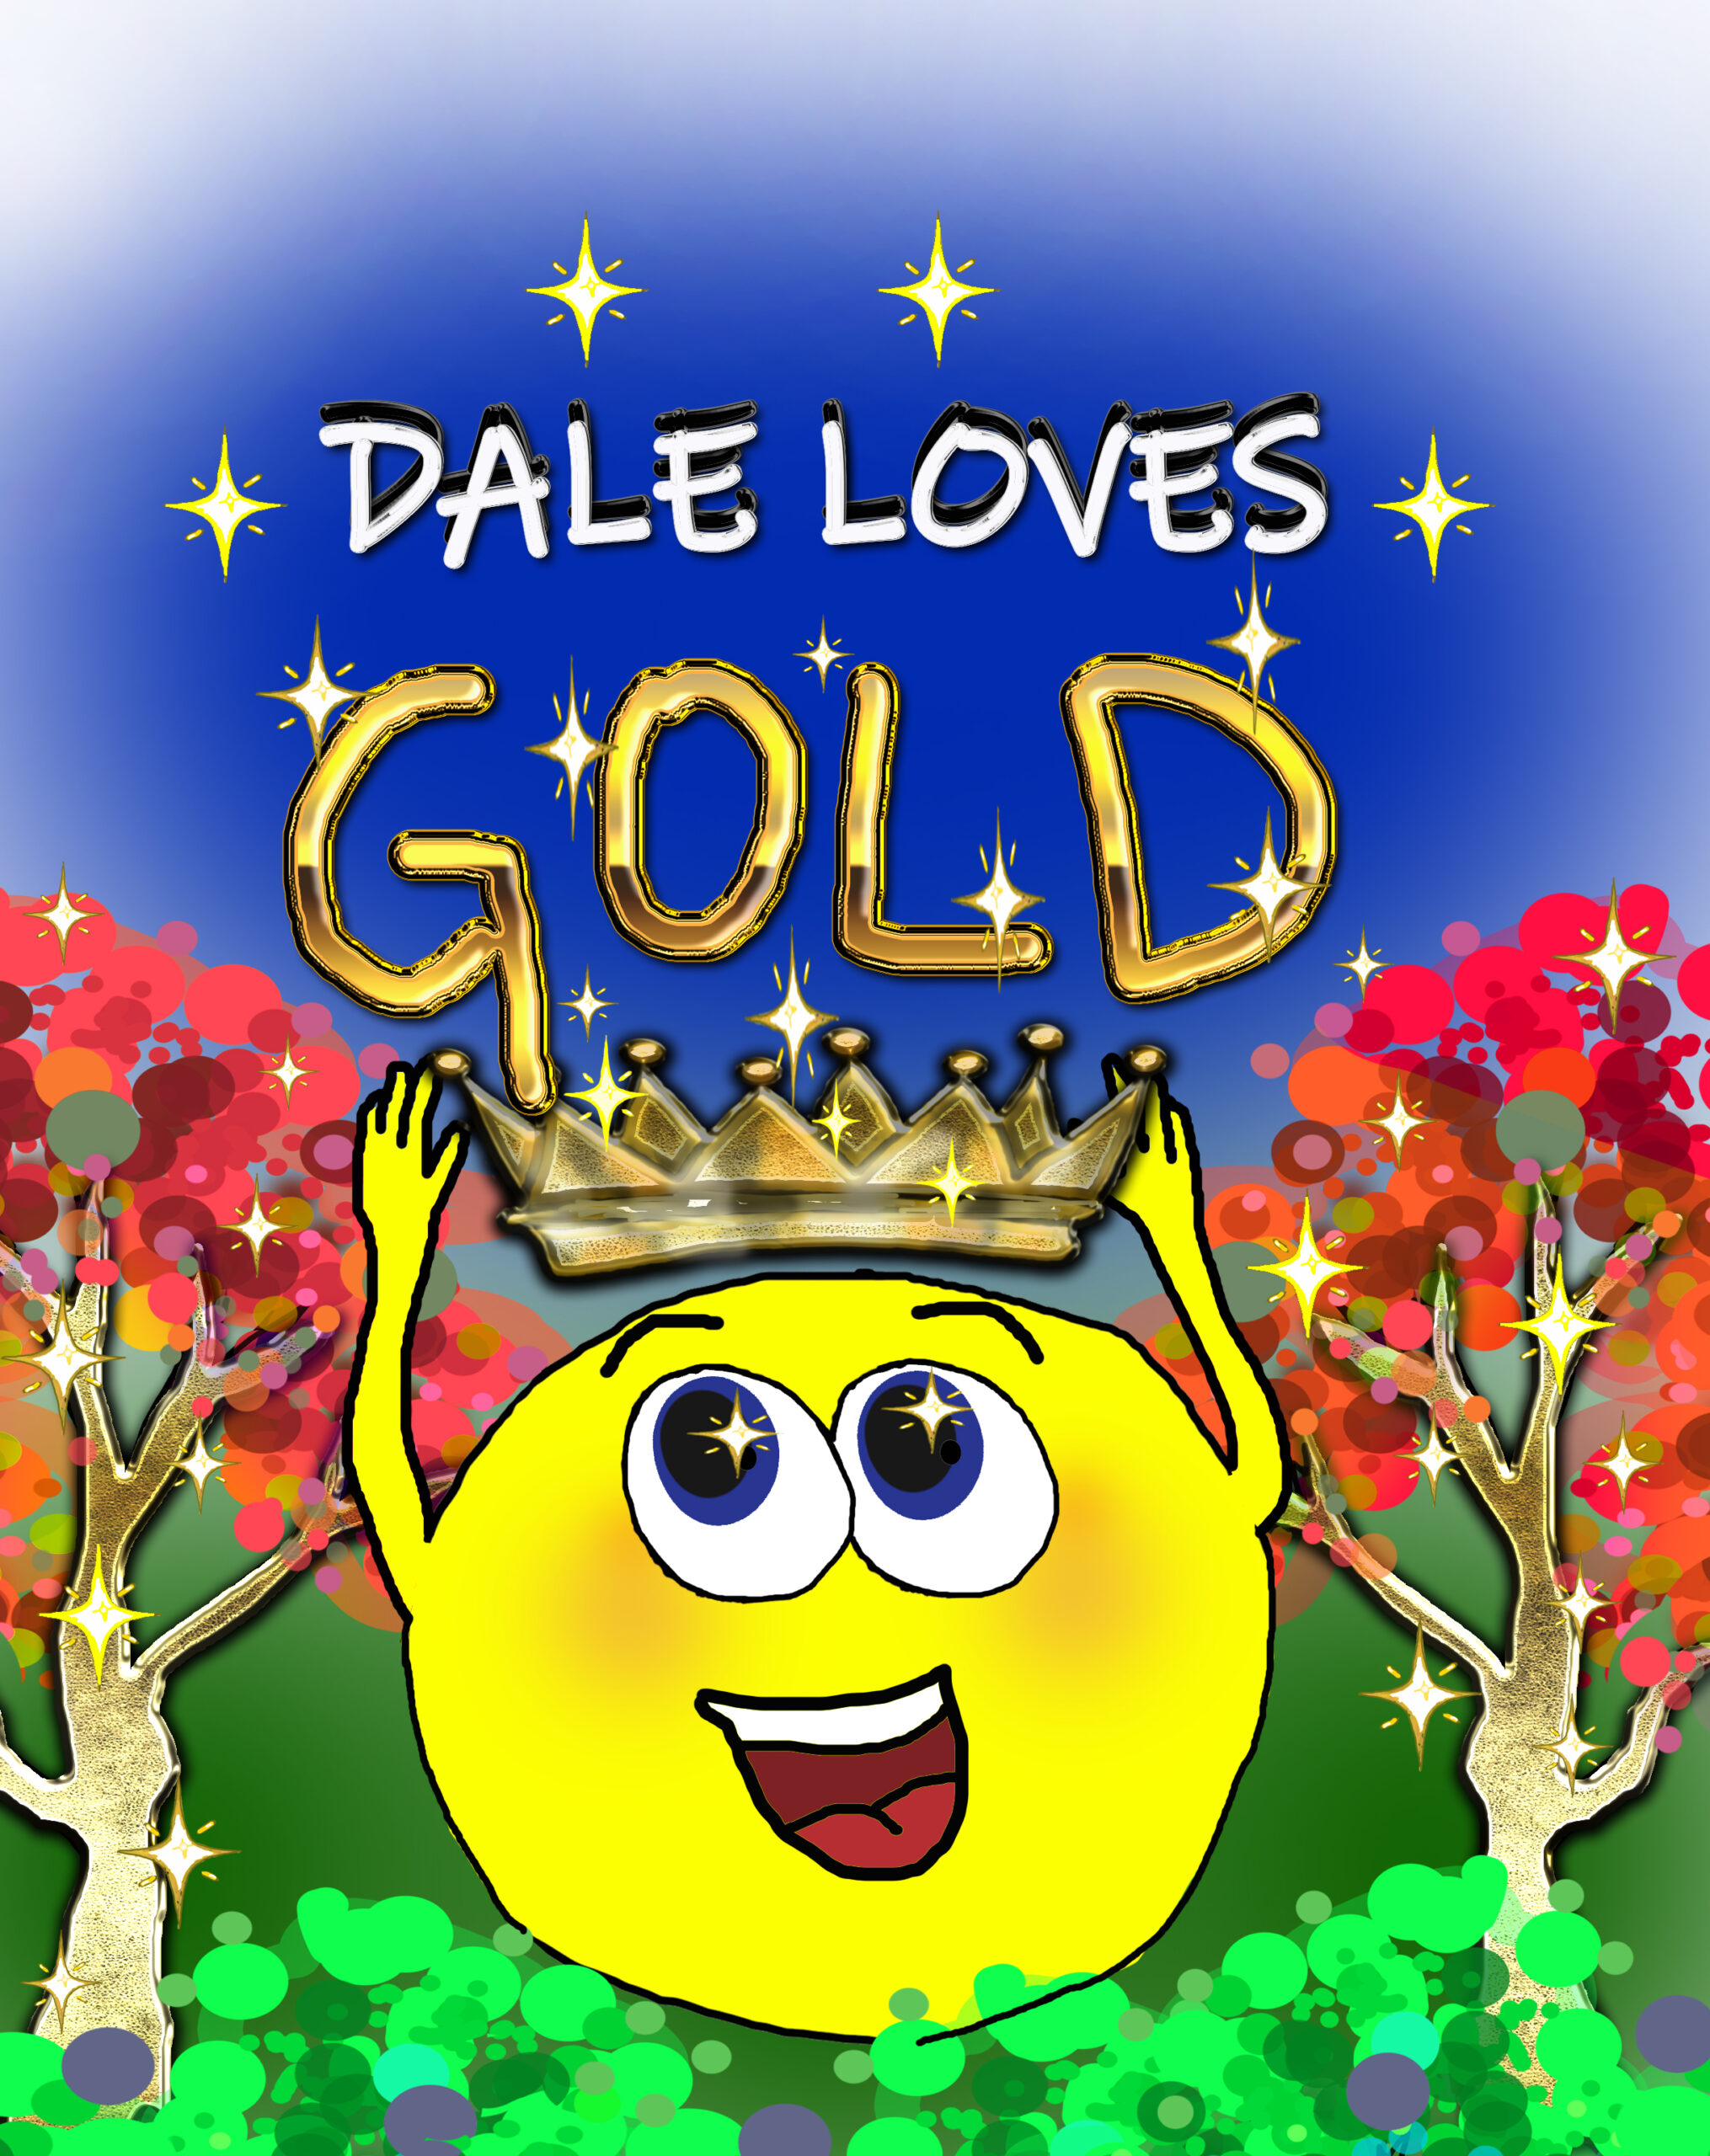 FREE: Dale loves gold by Mc Dale